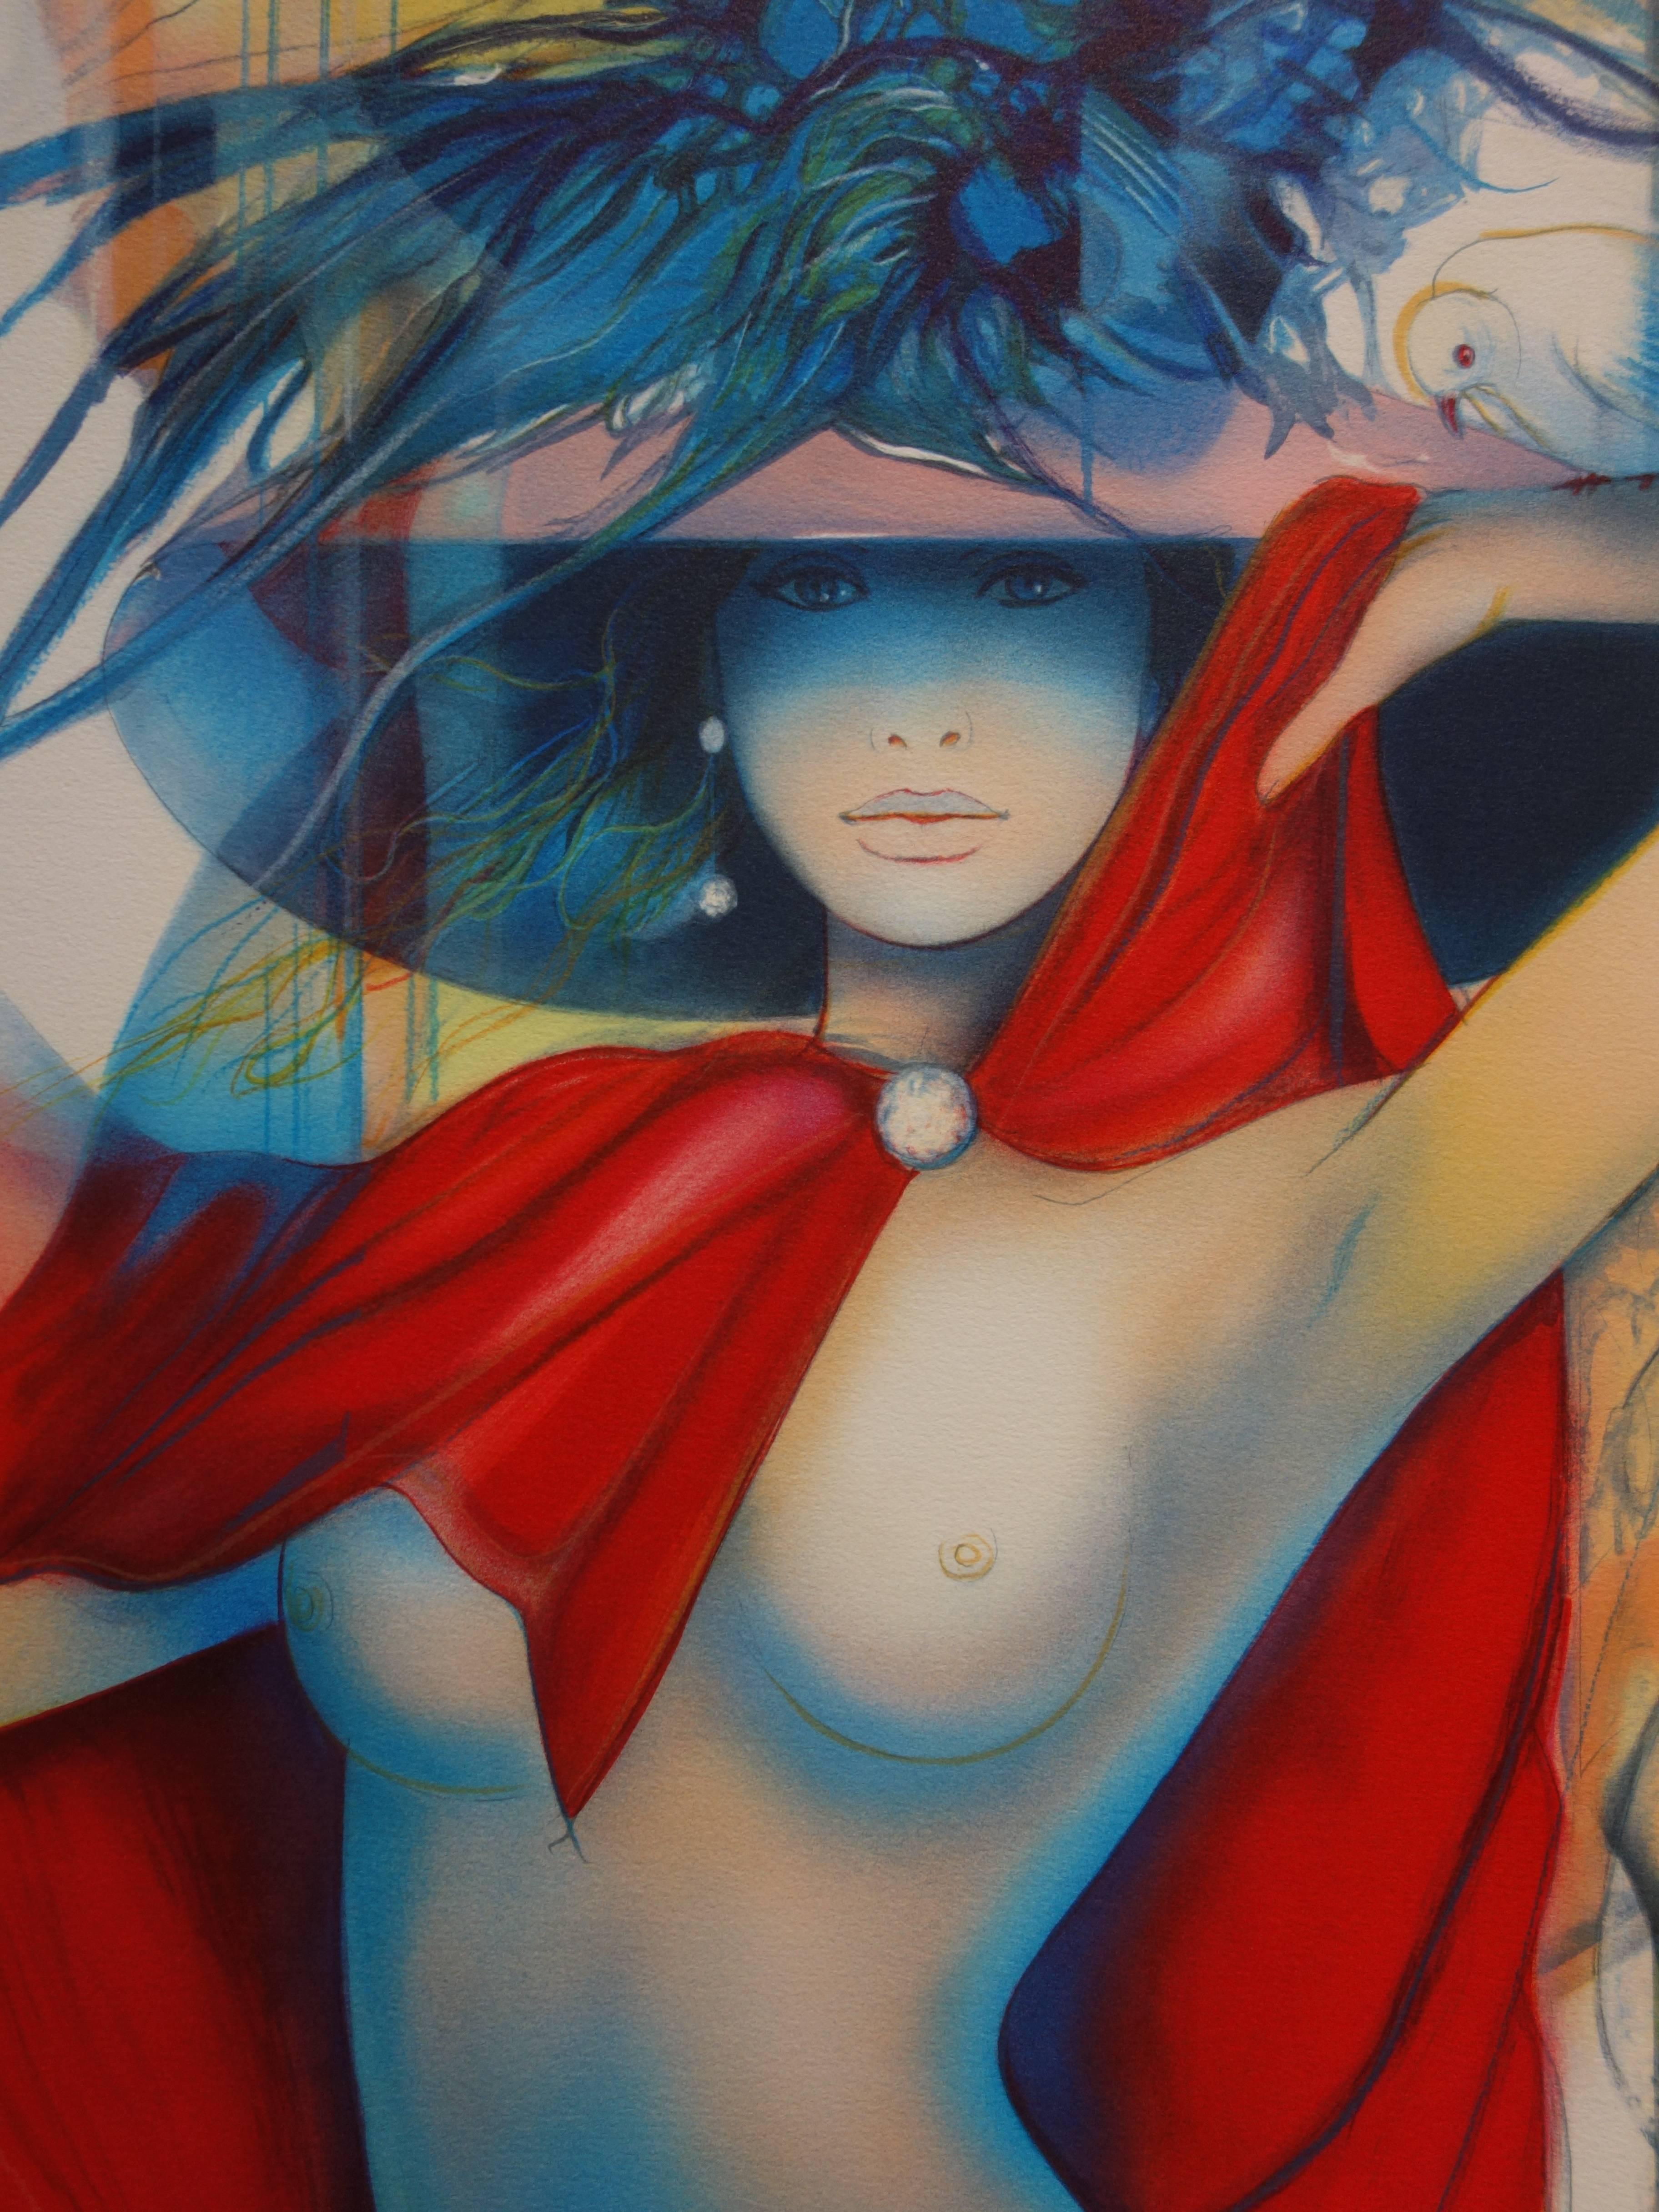 Woman with Red Cape and Doves - Original handsigned lithograph - 199ex - Brown Nude Print by Jean-Baptiste Valadie